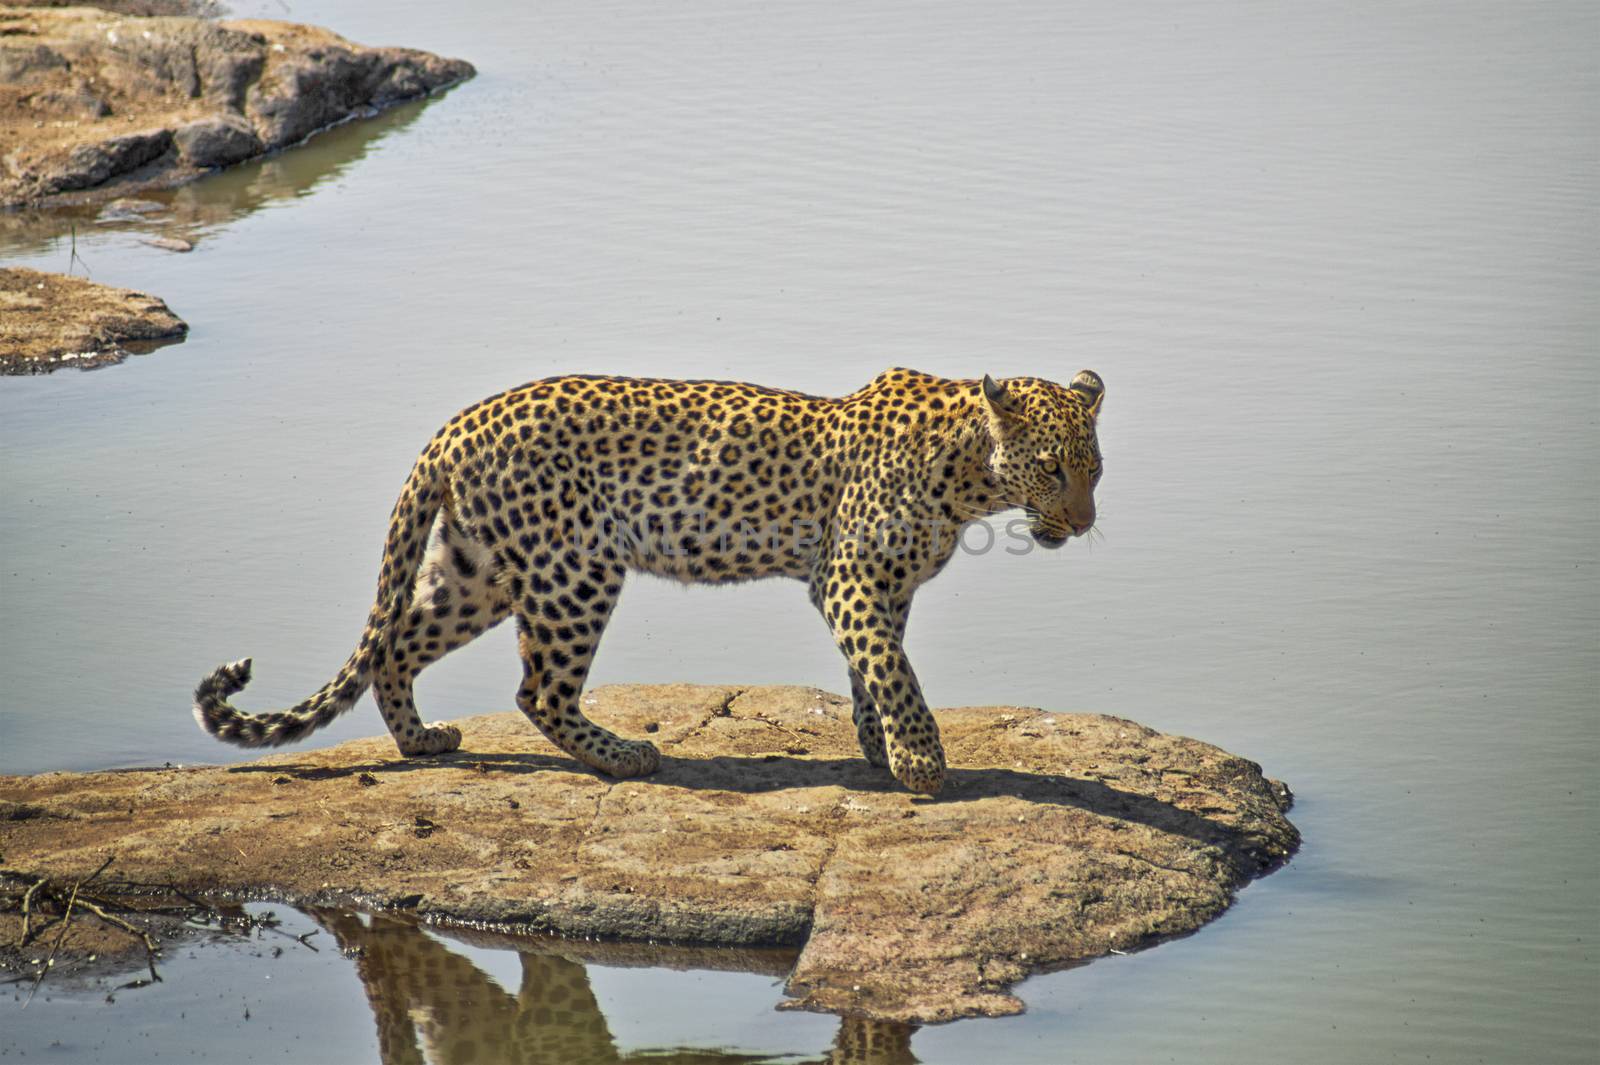 Leopard standing on a rock by a lake wating for a fish to appear